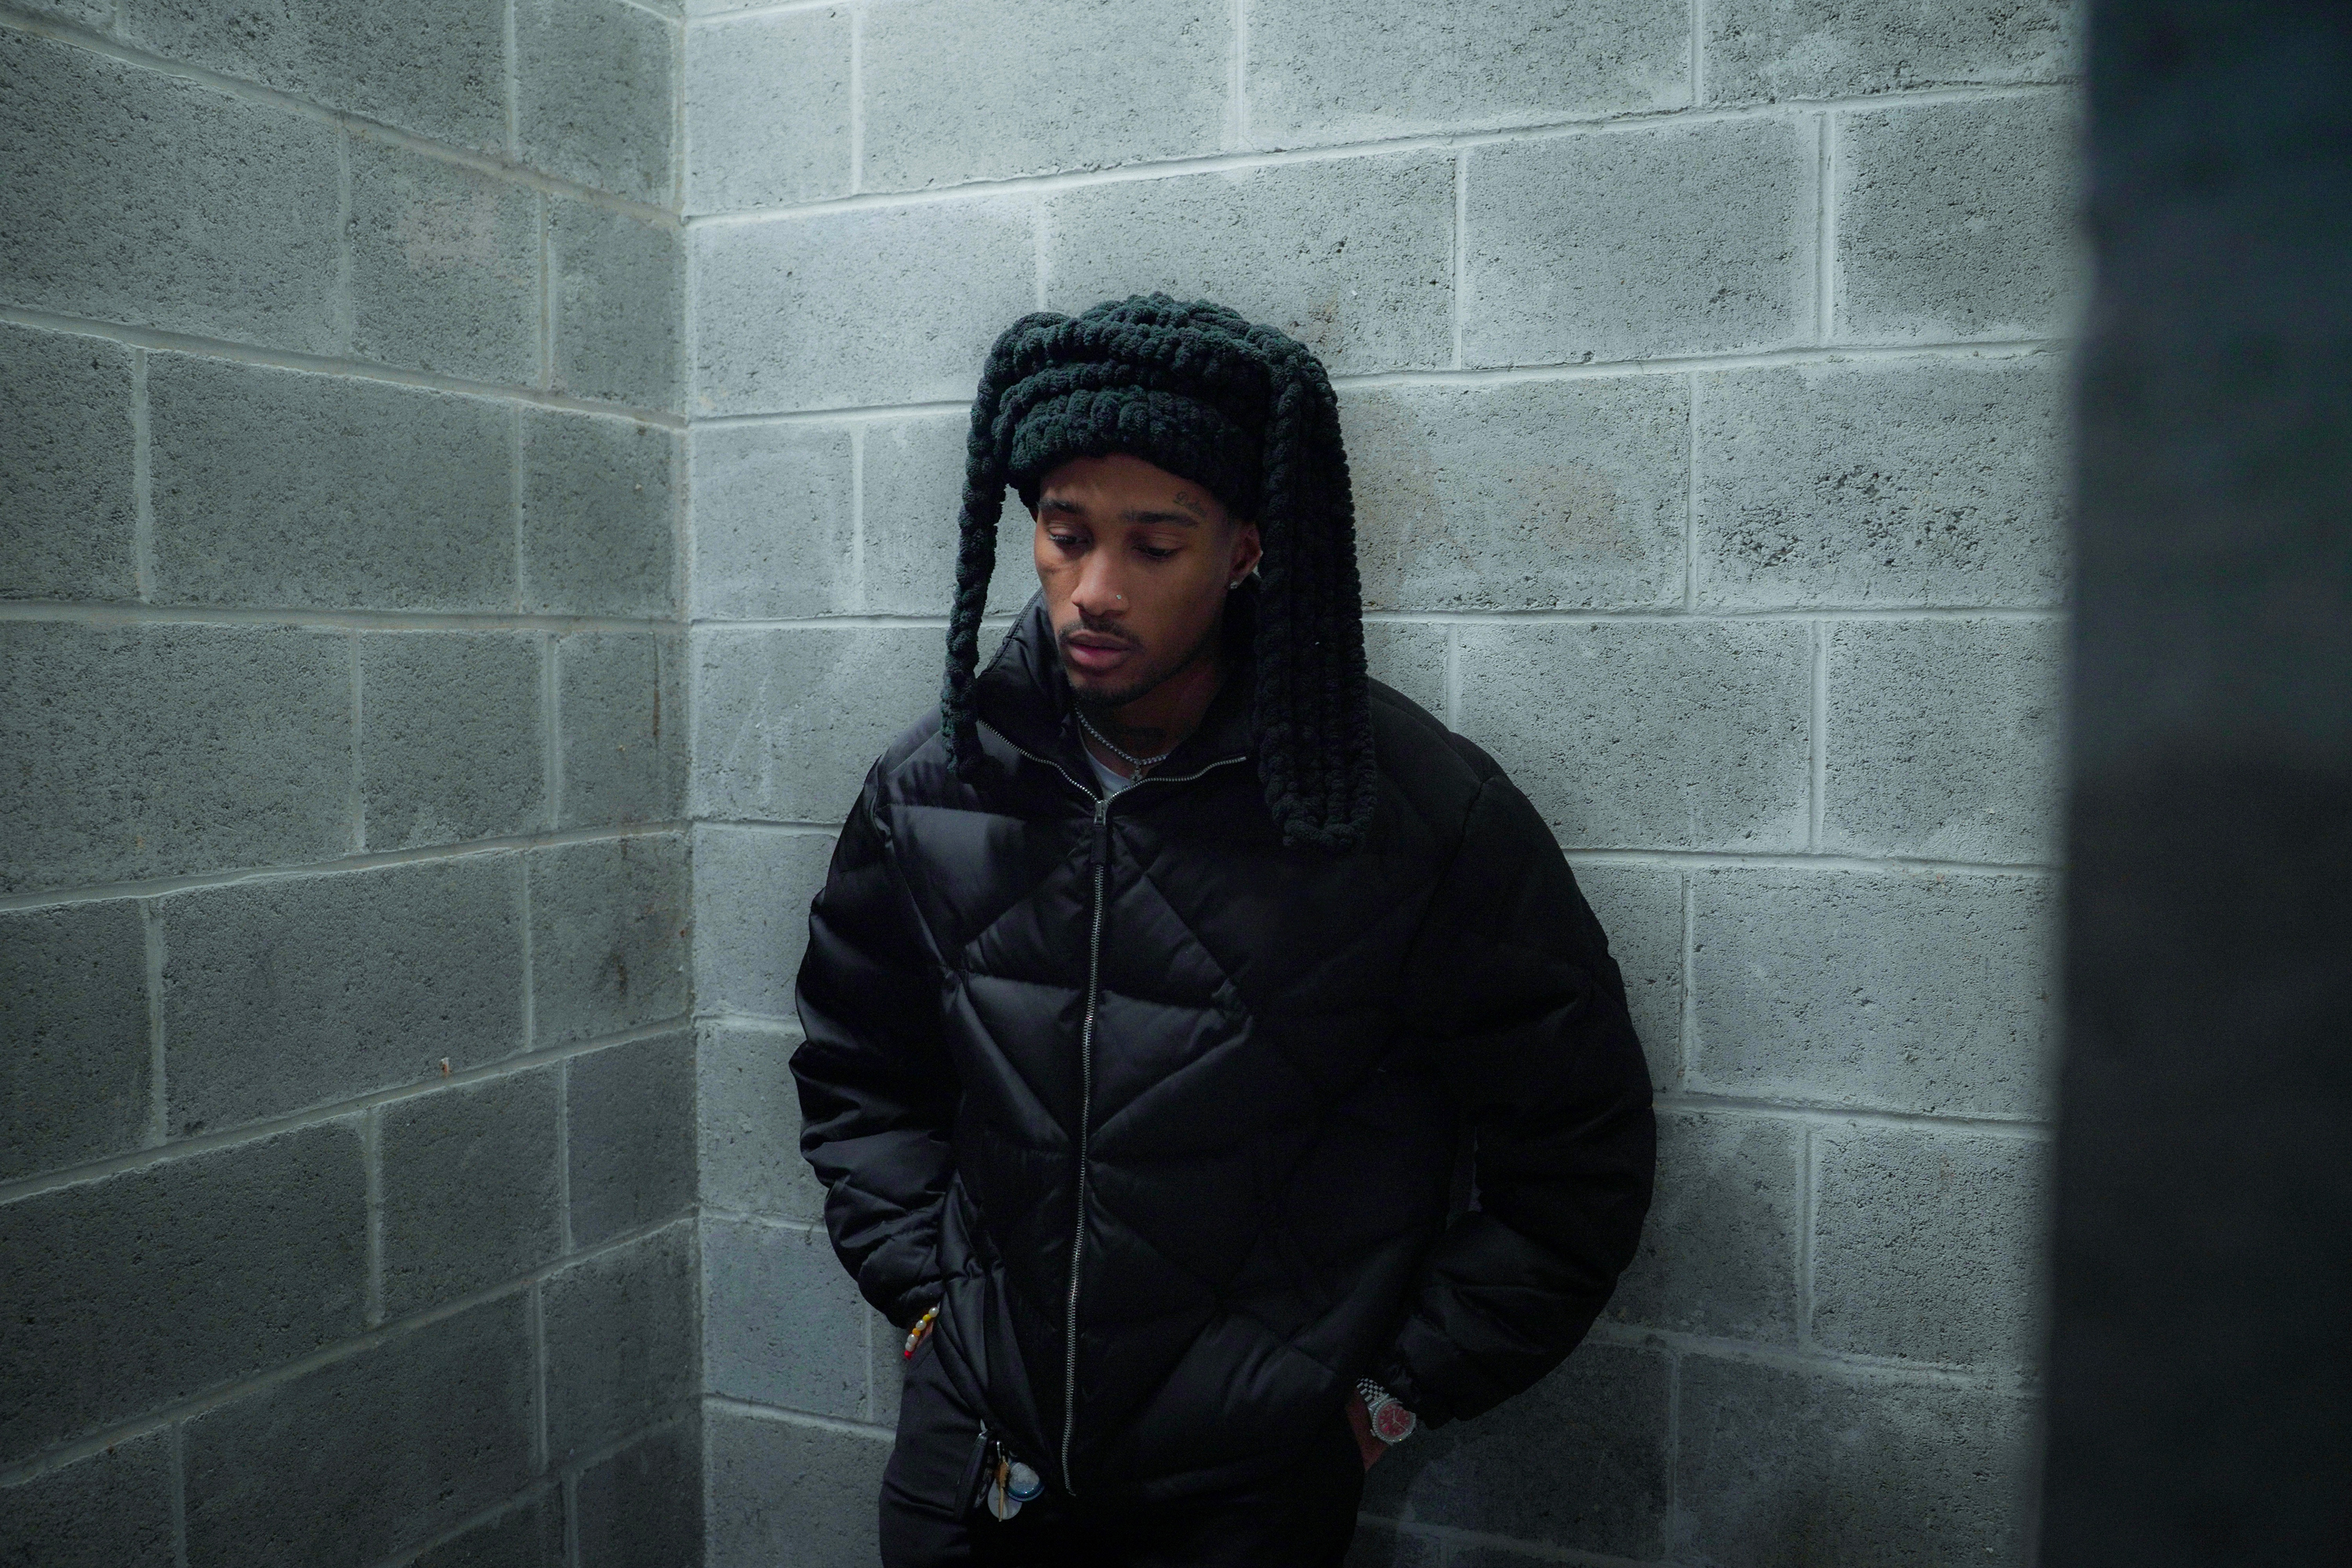 Man in a knitted hat and puffy jacket standing against a cinder block wall, looking thoughtful